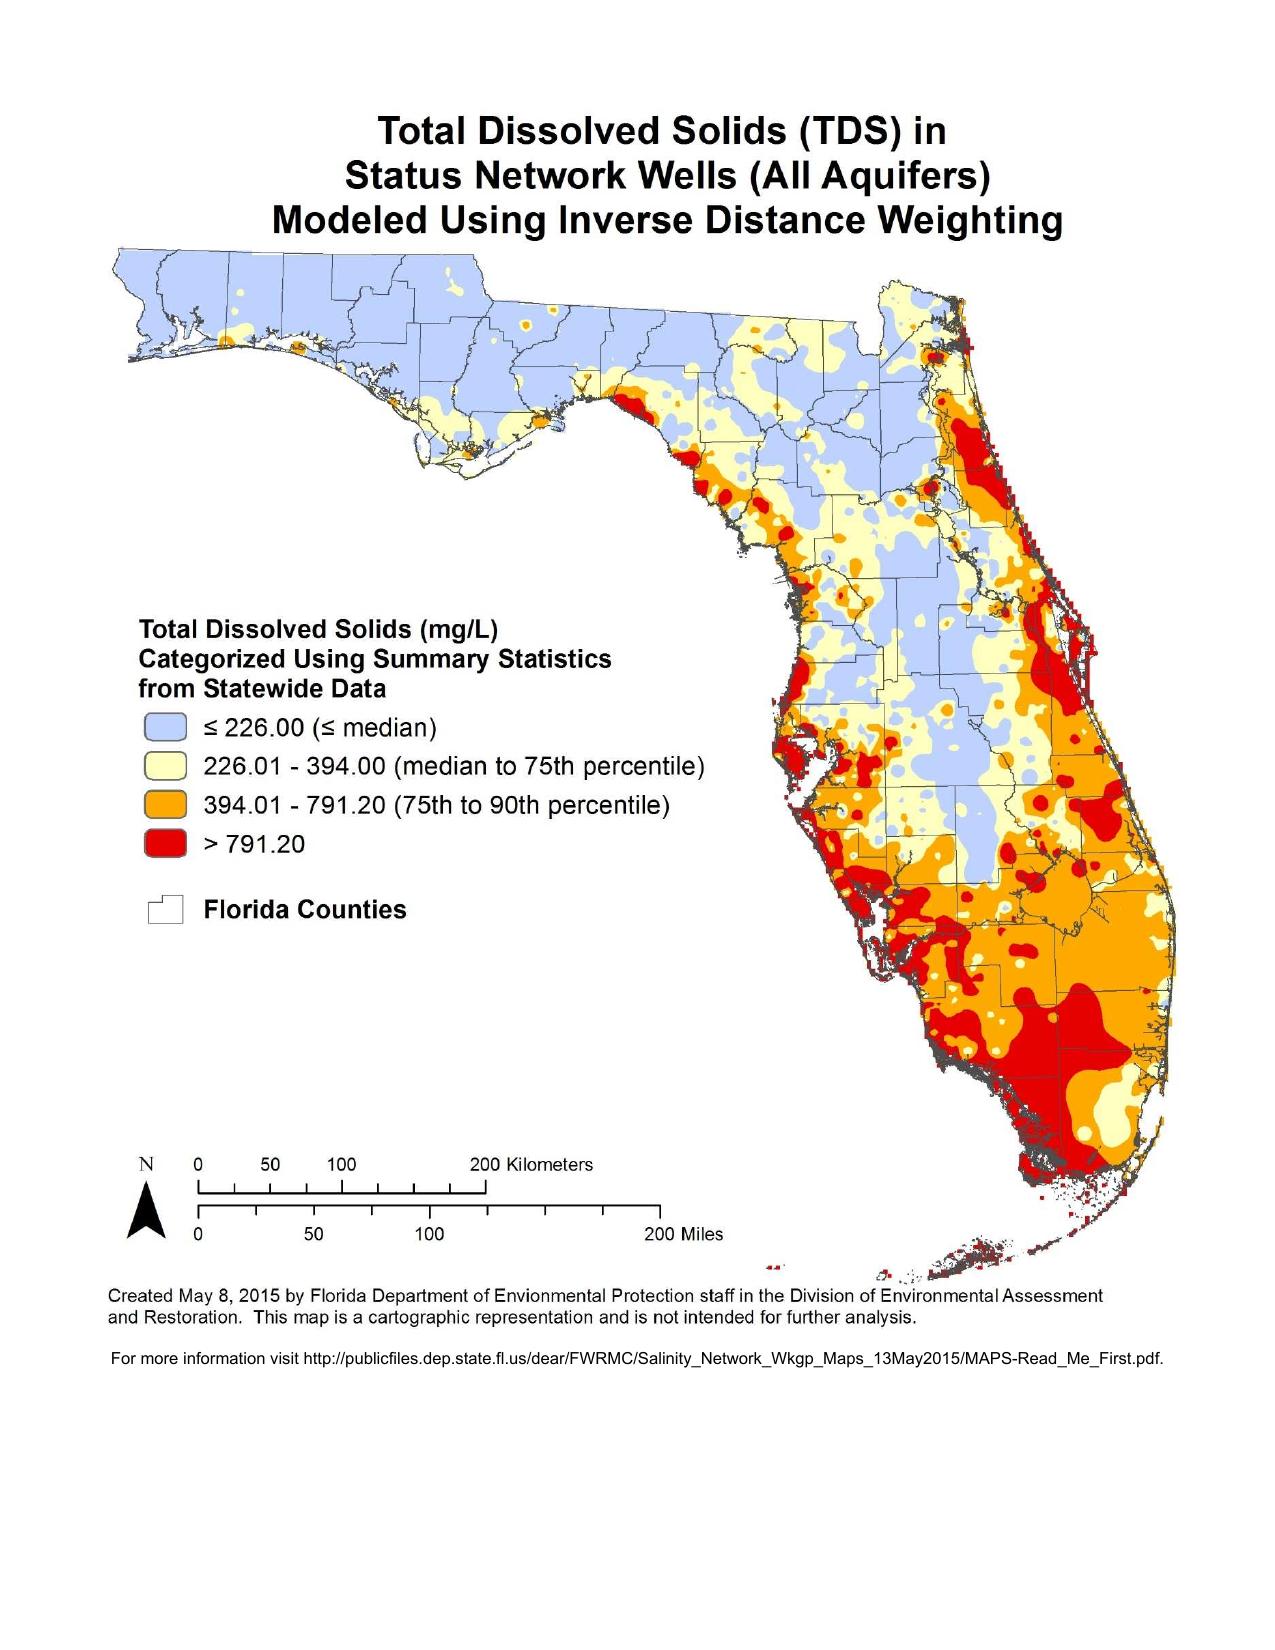 1275x1650 Total Dissolved Solids (TDS) in Status Network Wells (All Aquifers) Modeled Using Inverse Distance Weighting, in Florida Well Salinity Study, by FL-DEP, 13 July 2015